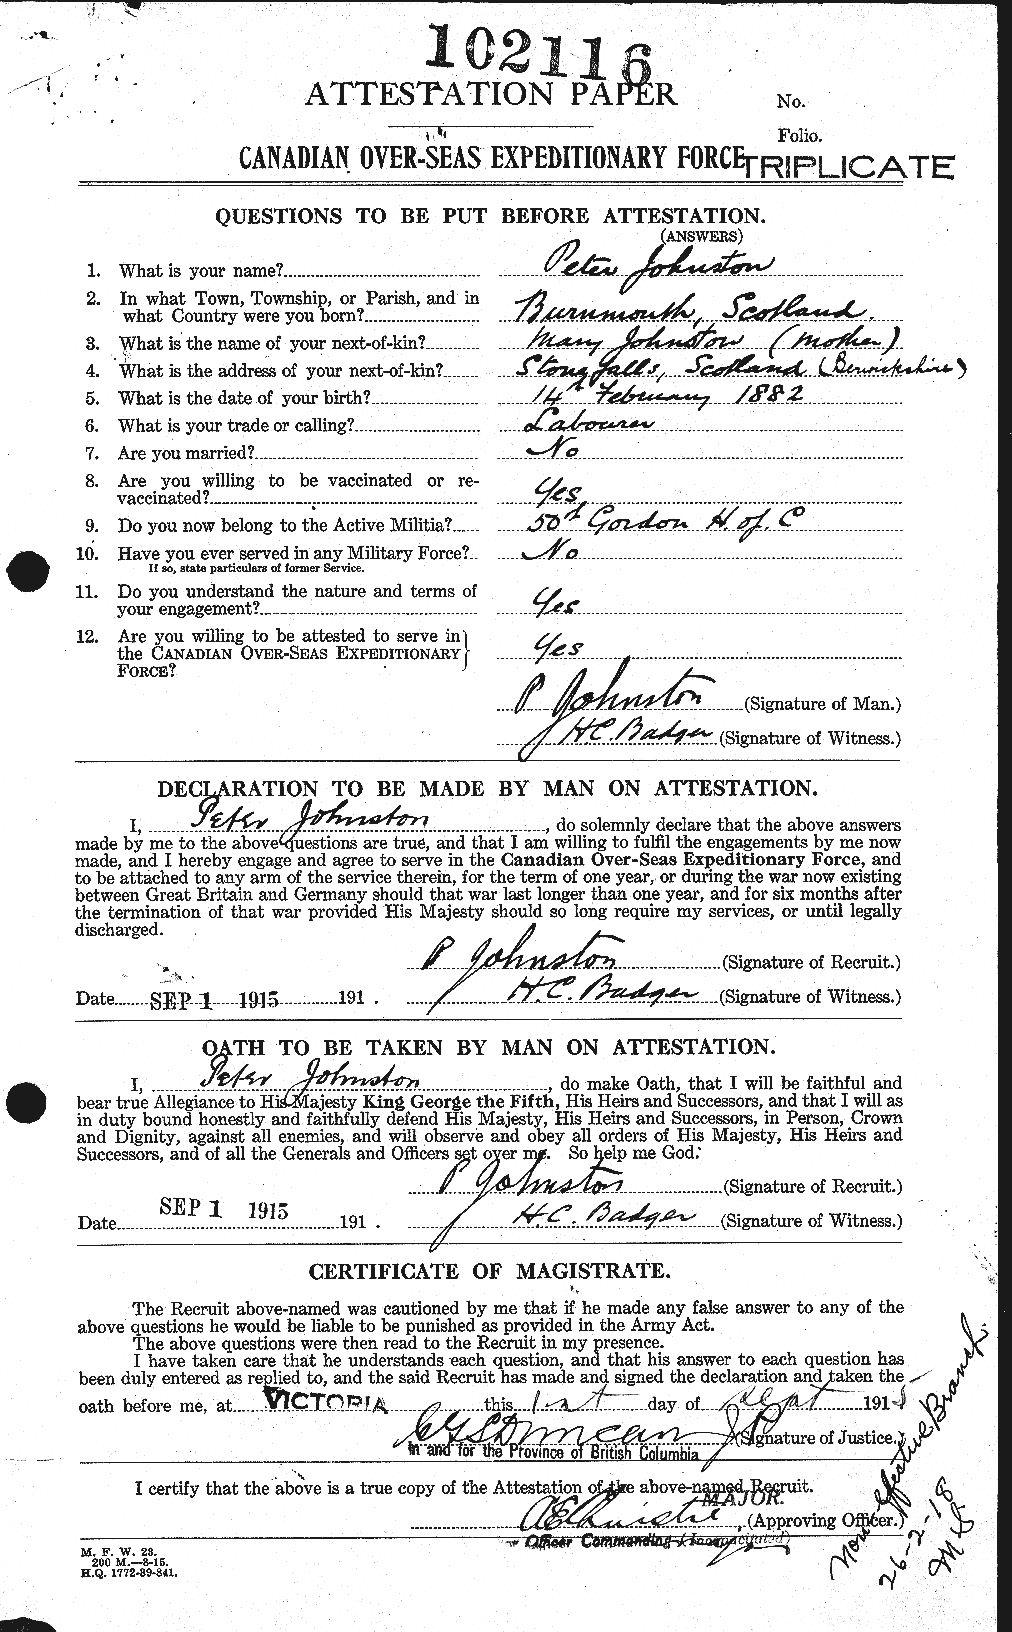 Personnel Records of the First World War - CEF 423038a